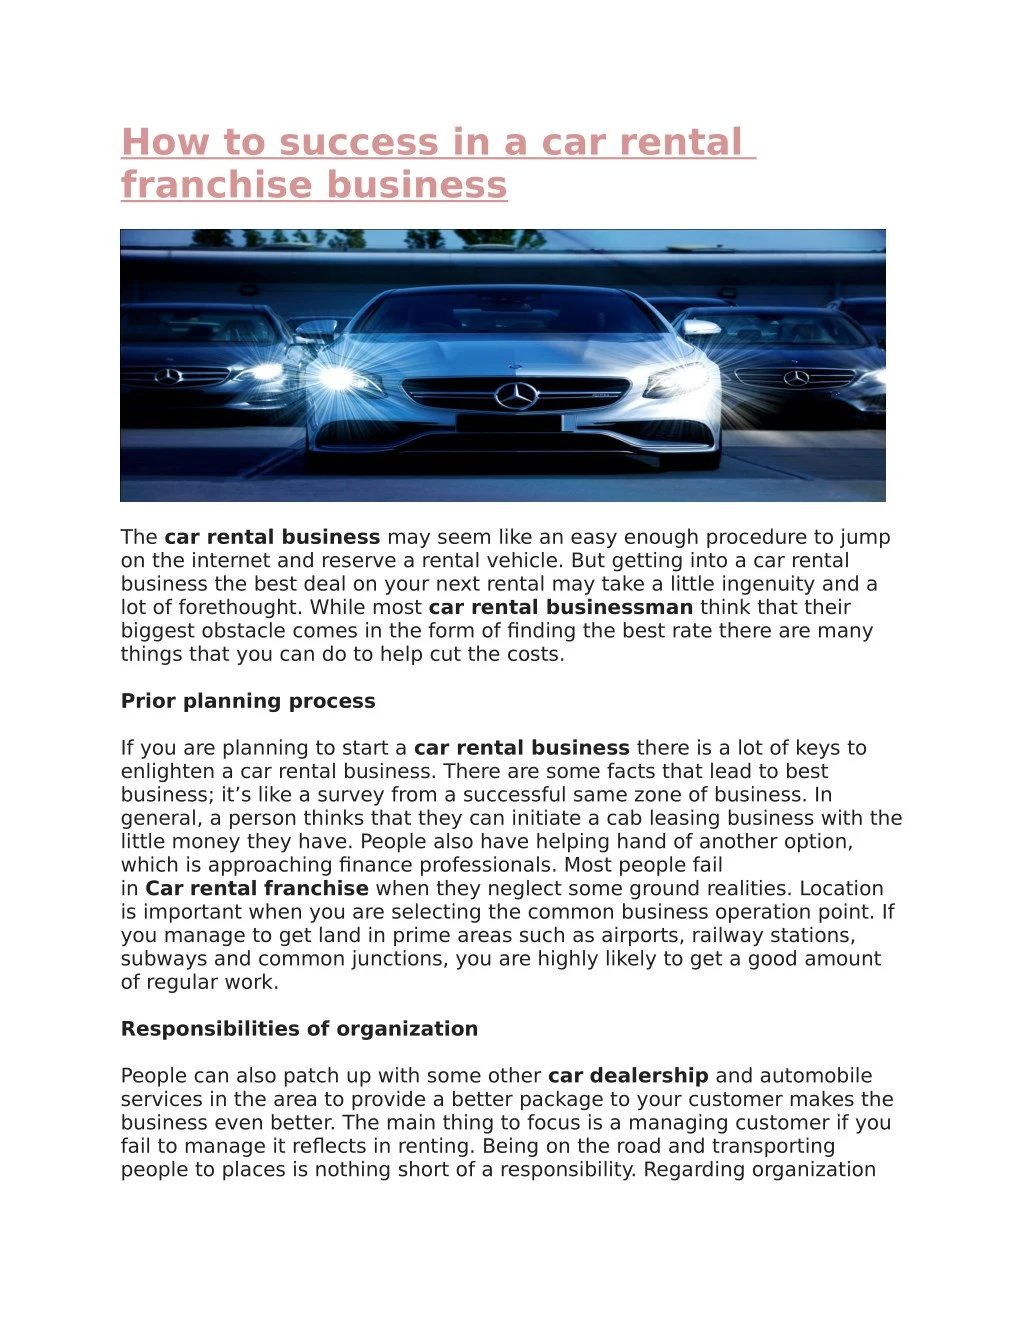 how to success in a car rental franchise business